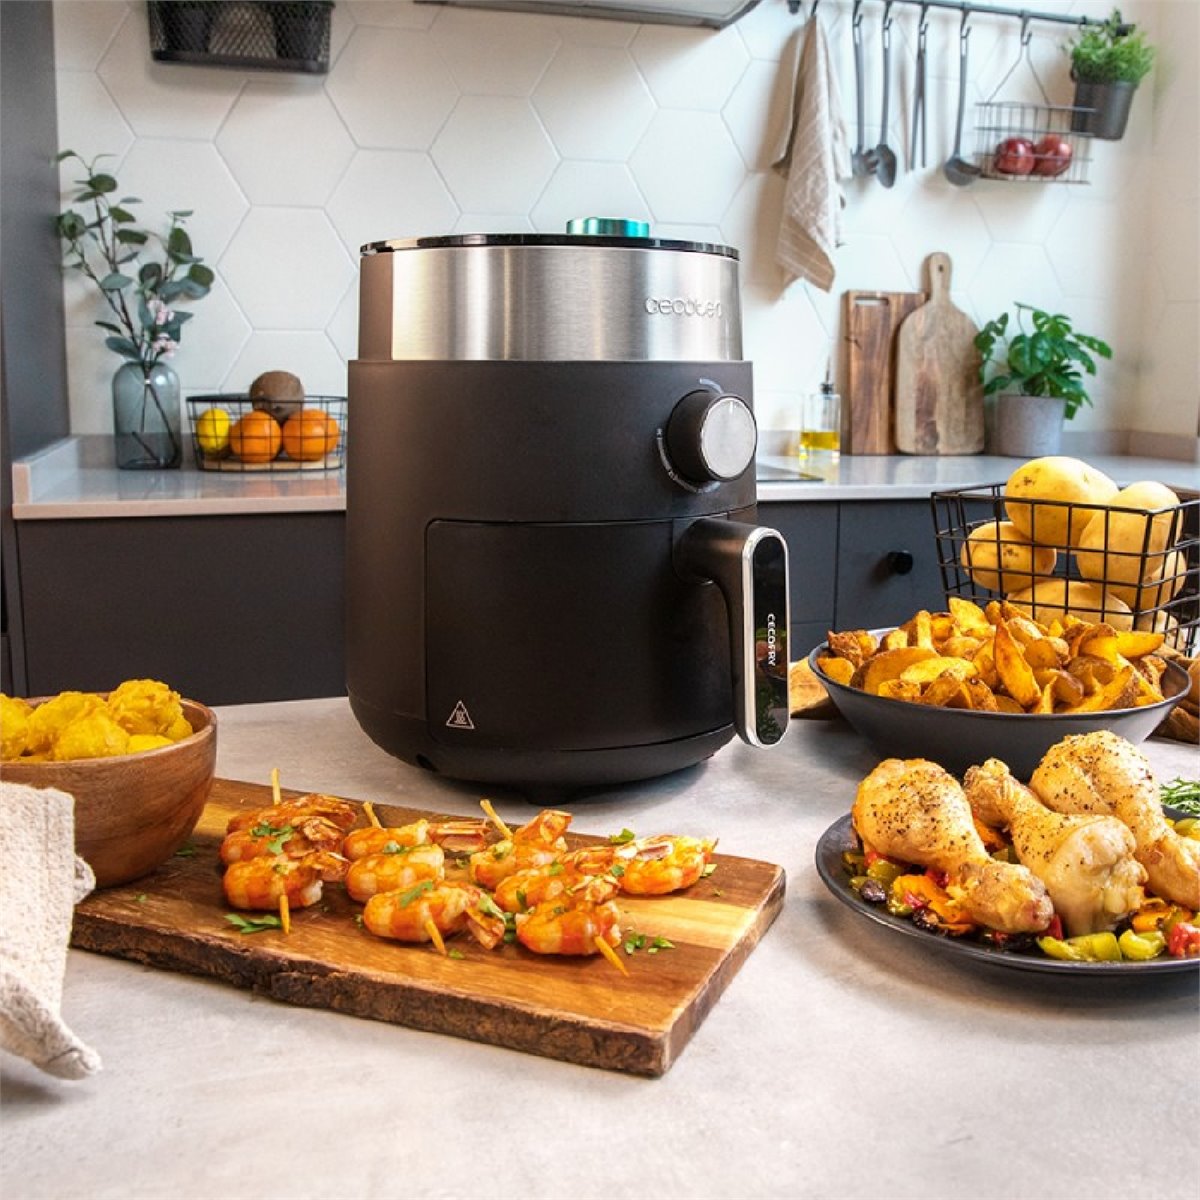 Cecofry 6000 experience - Air fryer under €100 also on sale on  